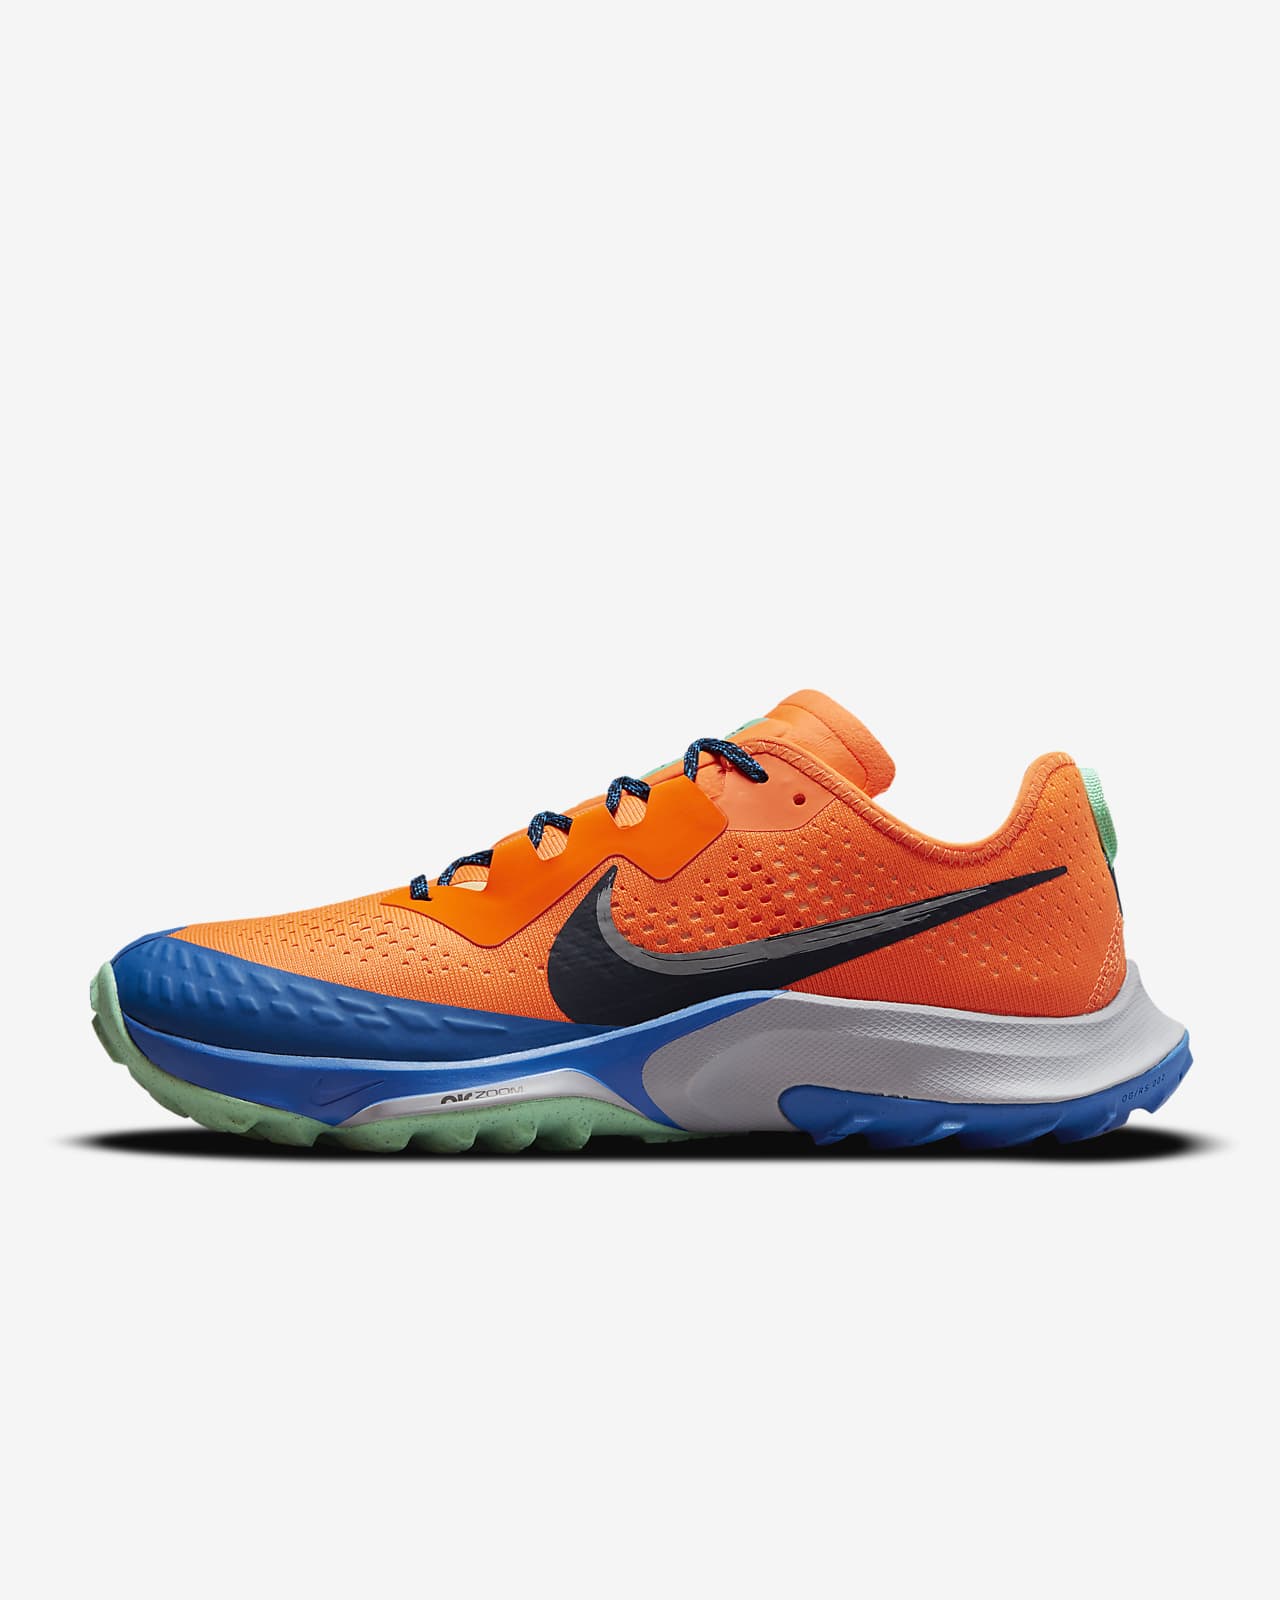 The Nike Air Zoom Terra Kiger 7 Review They Dont Want You to See - Mind-Blowing Insights!